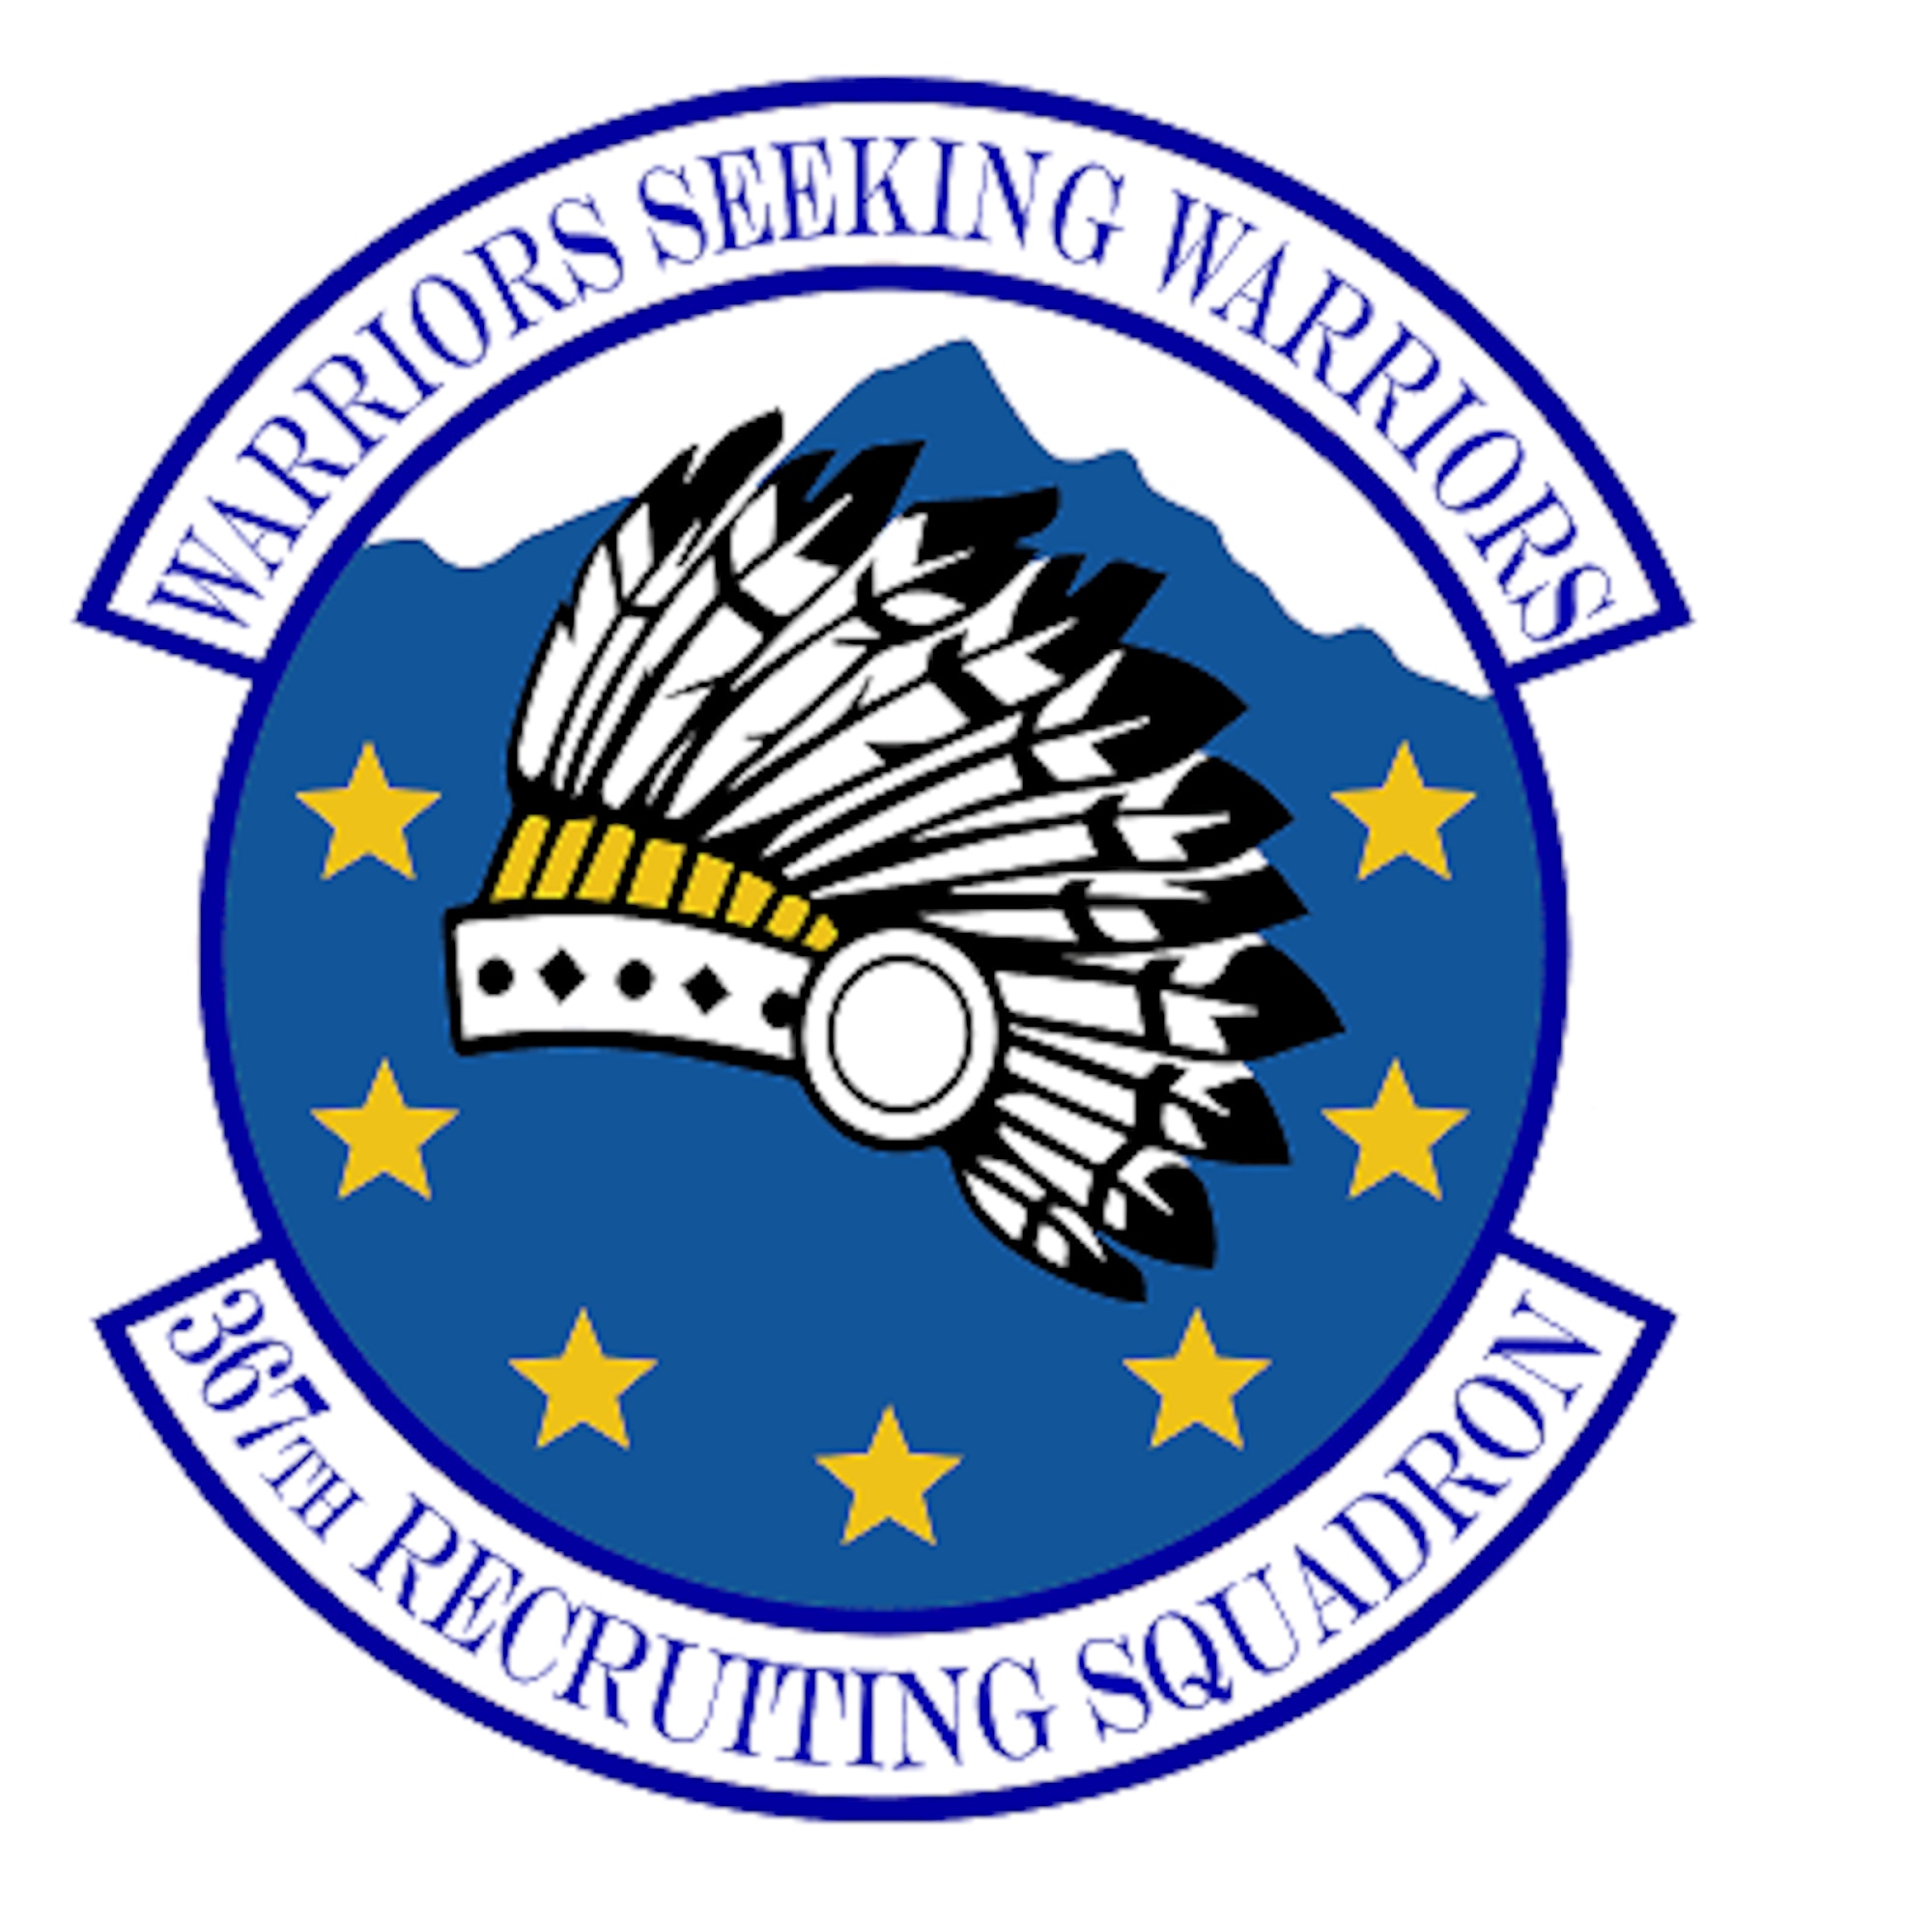 An emblem representing the 367th Recruiting Squadron